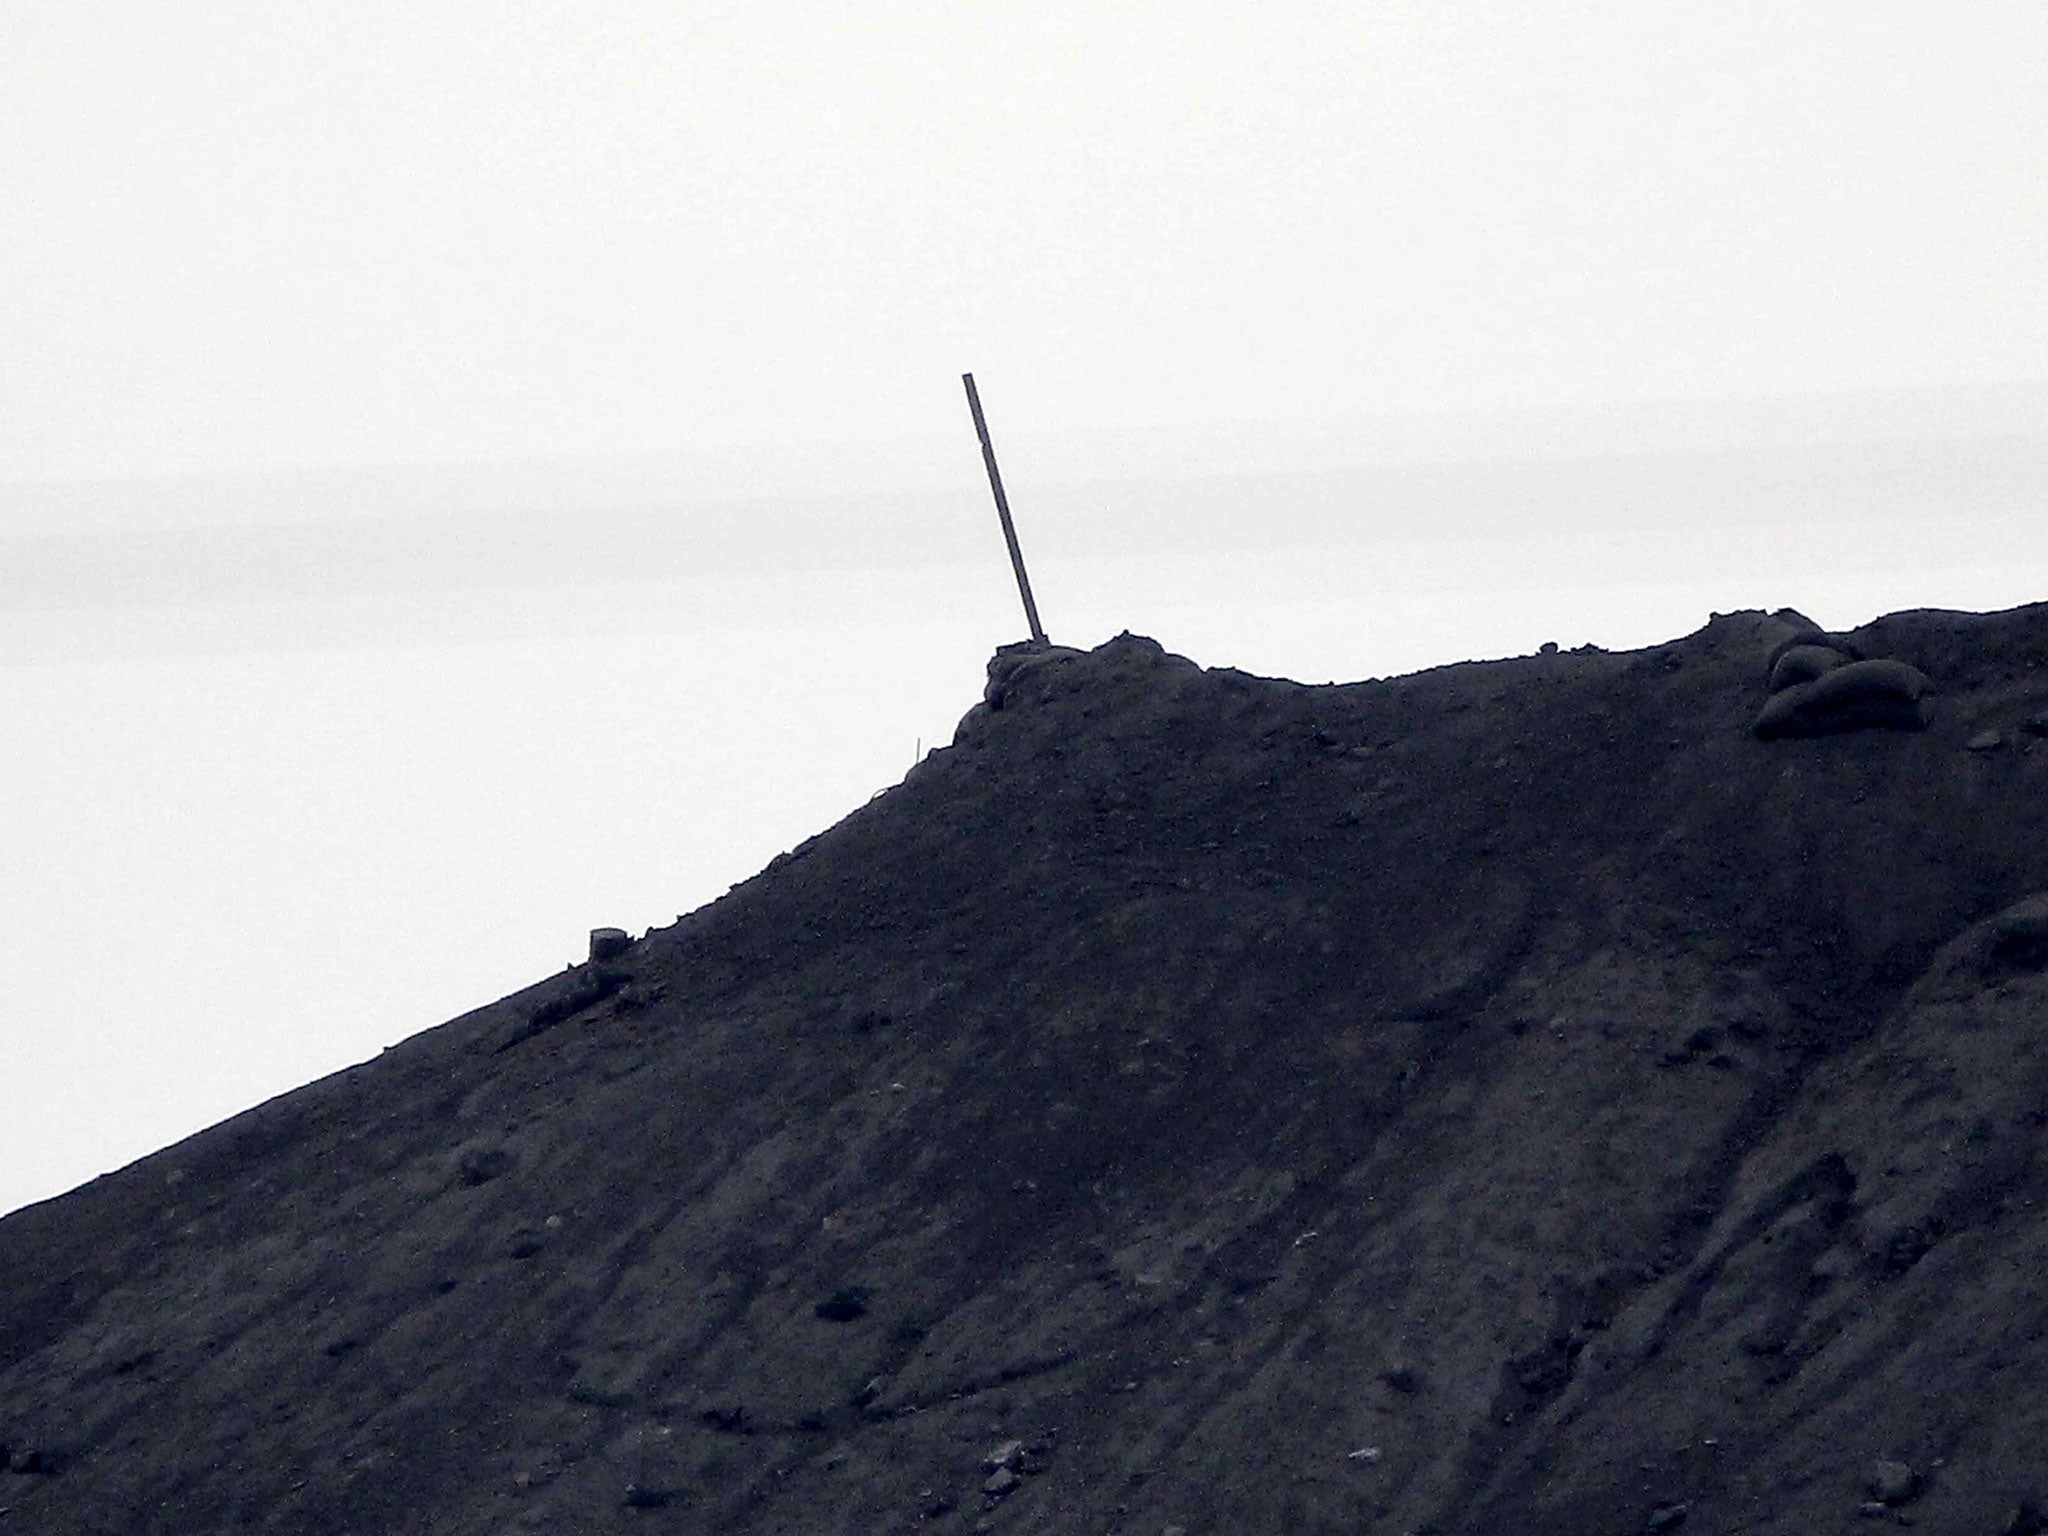 A black flag belonging to Isis is taken down after it was symbolically raised on top of a hill two weeks ago in Kobani, Syria